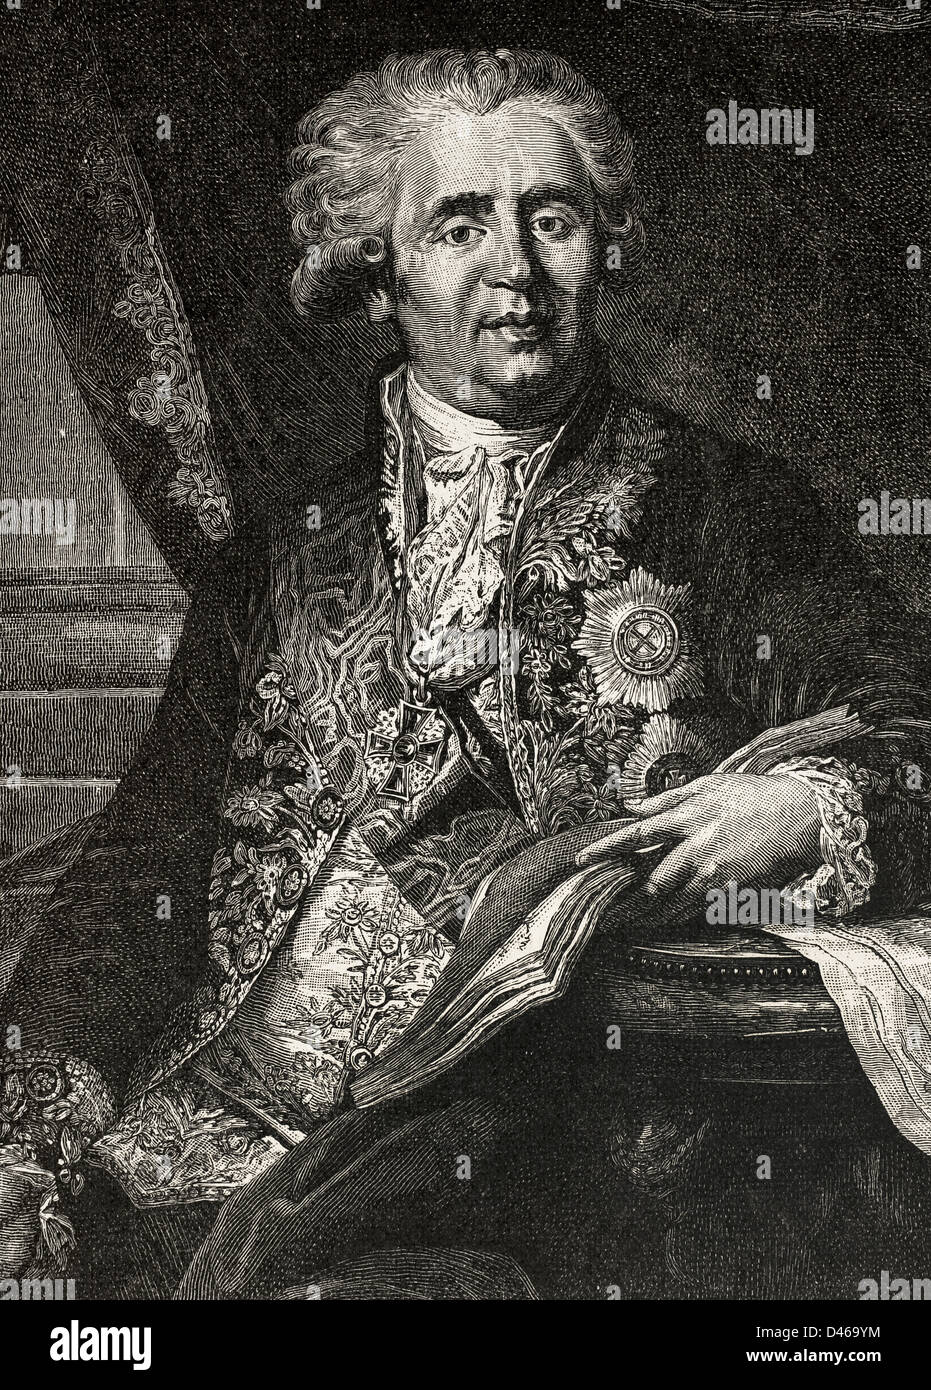 Prince Alexander Bezborodko (1747-1799). Grand Chancellor of Russia and chief architect of Catherine the Great. Engraving. Stock Photo